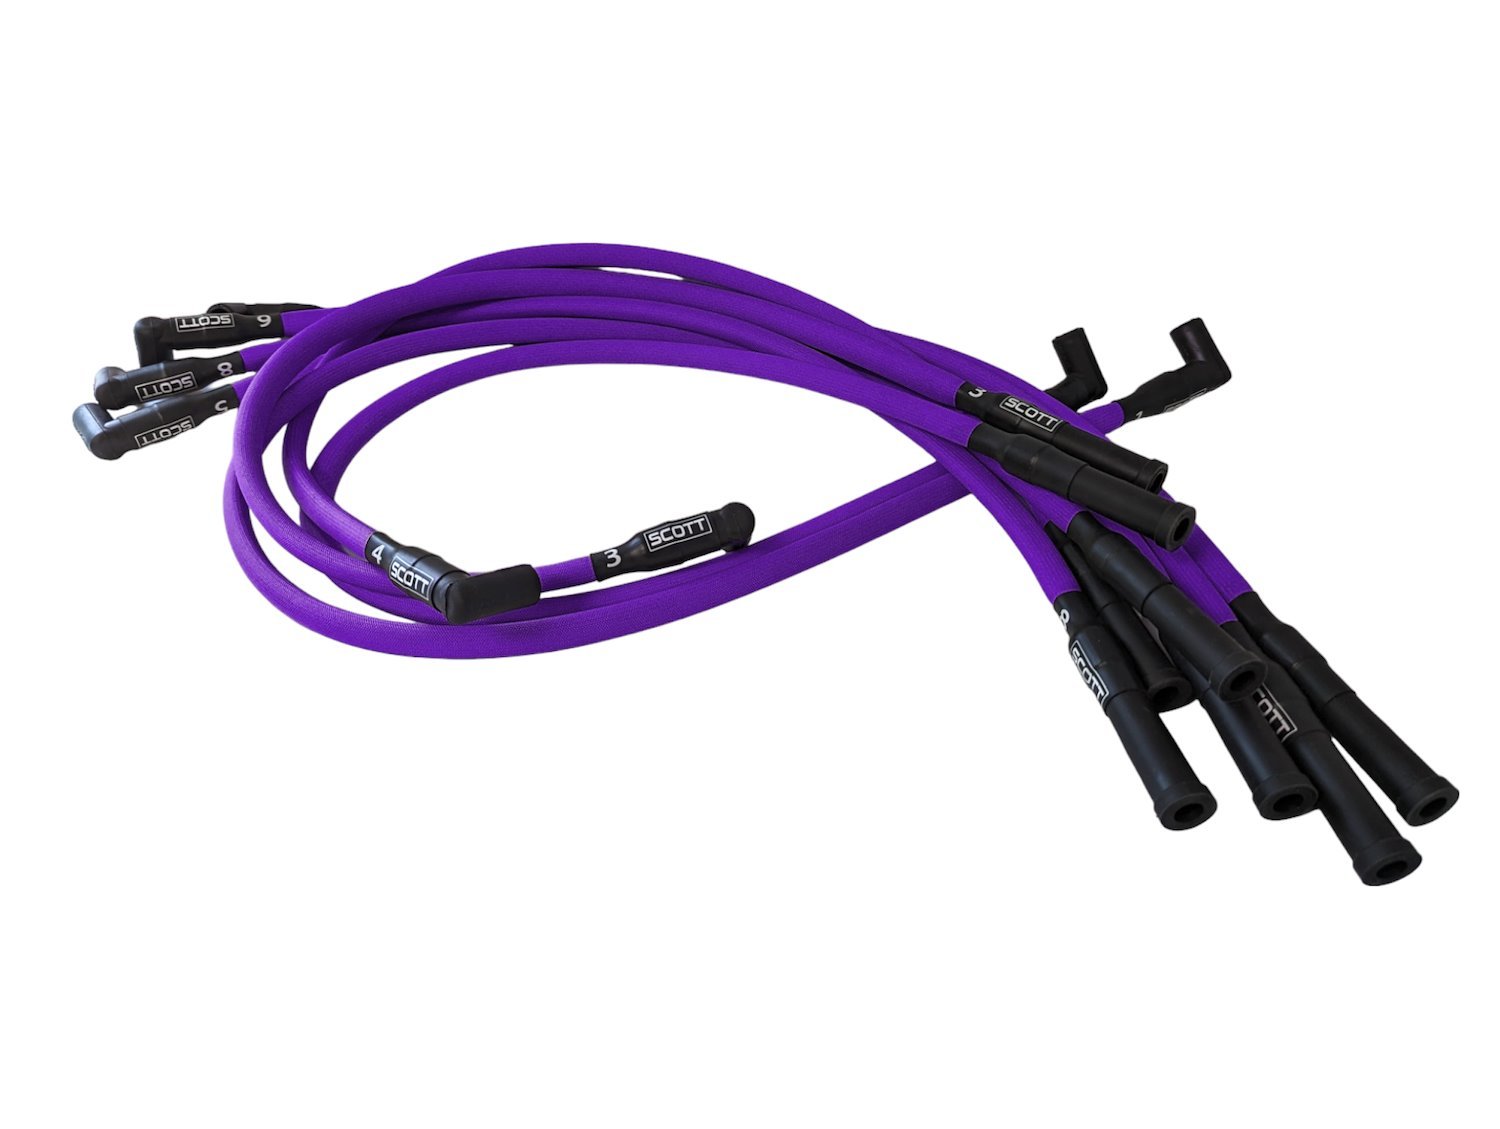 SPW-PS-428-7 High-Performance Fiberglass-Oversleeved Spark Plug Wire Set for Big Block Ford FE [Purple]